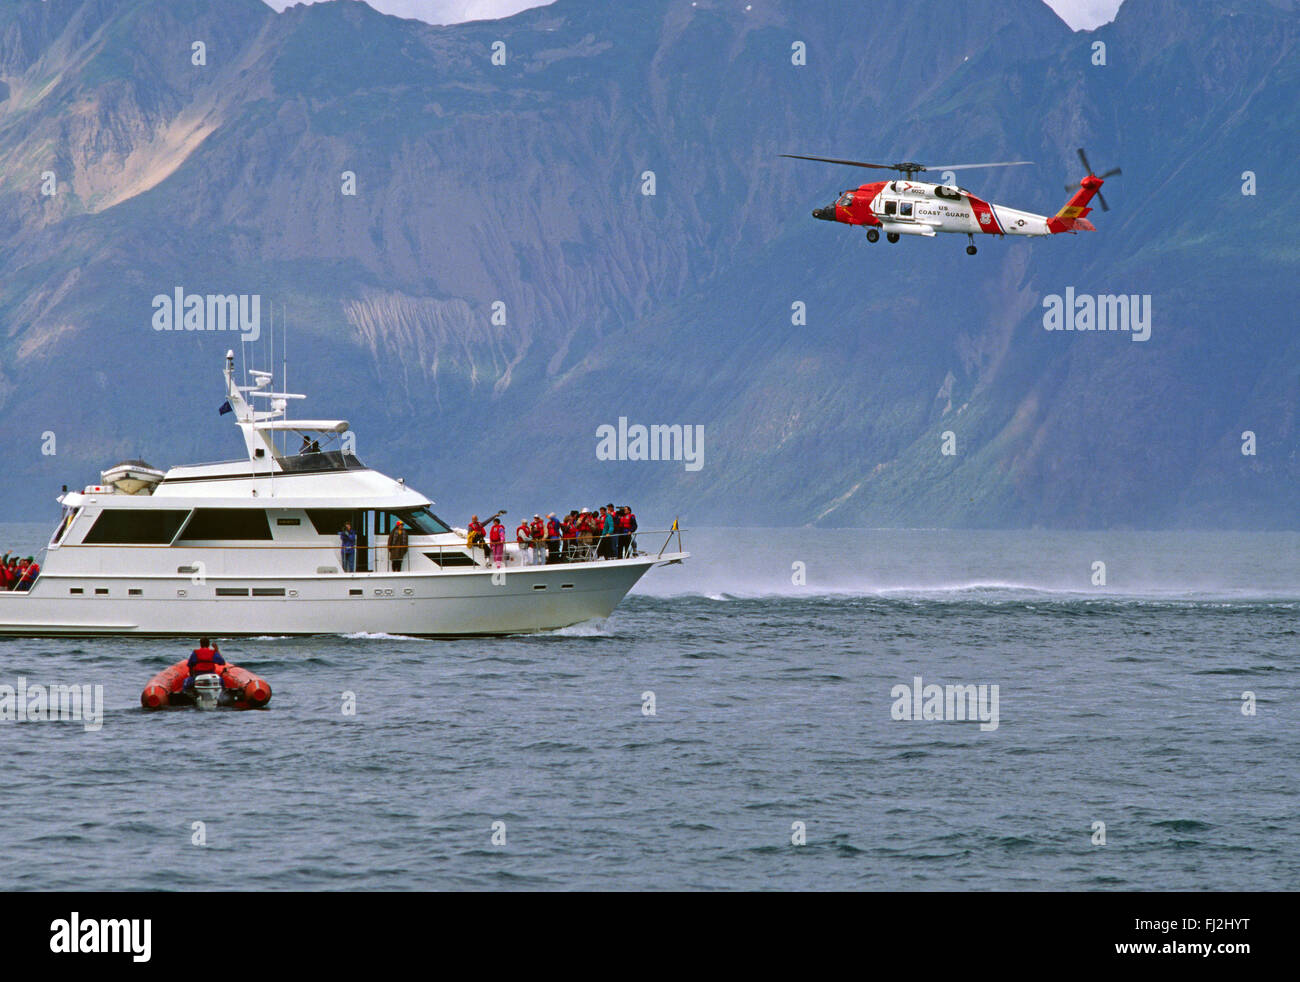 RESCUED PASSENGERS from the YORKTOWN CLIPPER aboard a private vessel with COAST GAURD HELICOPTER assisting - GLACIER BAY, ALASKA Stock Photo